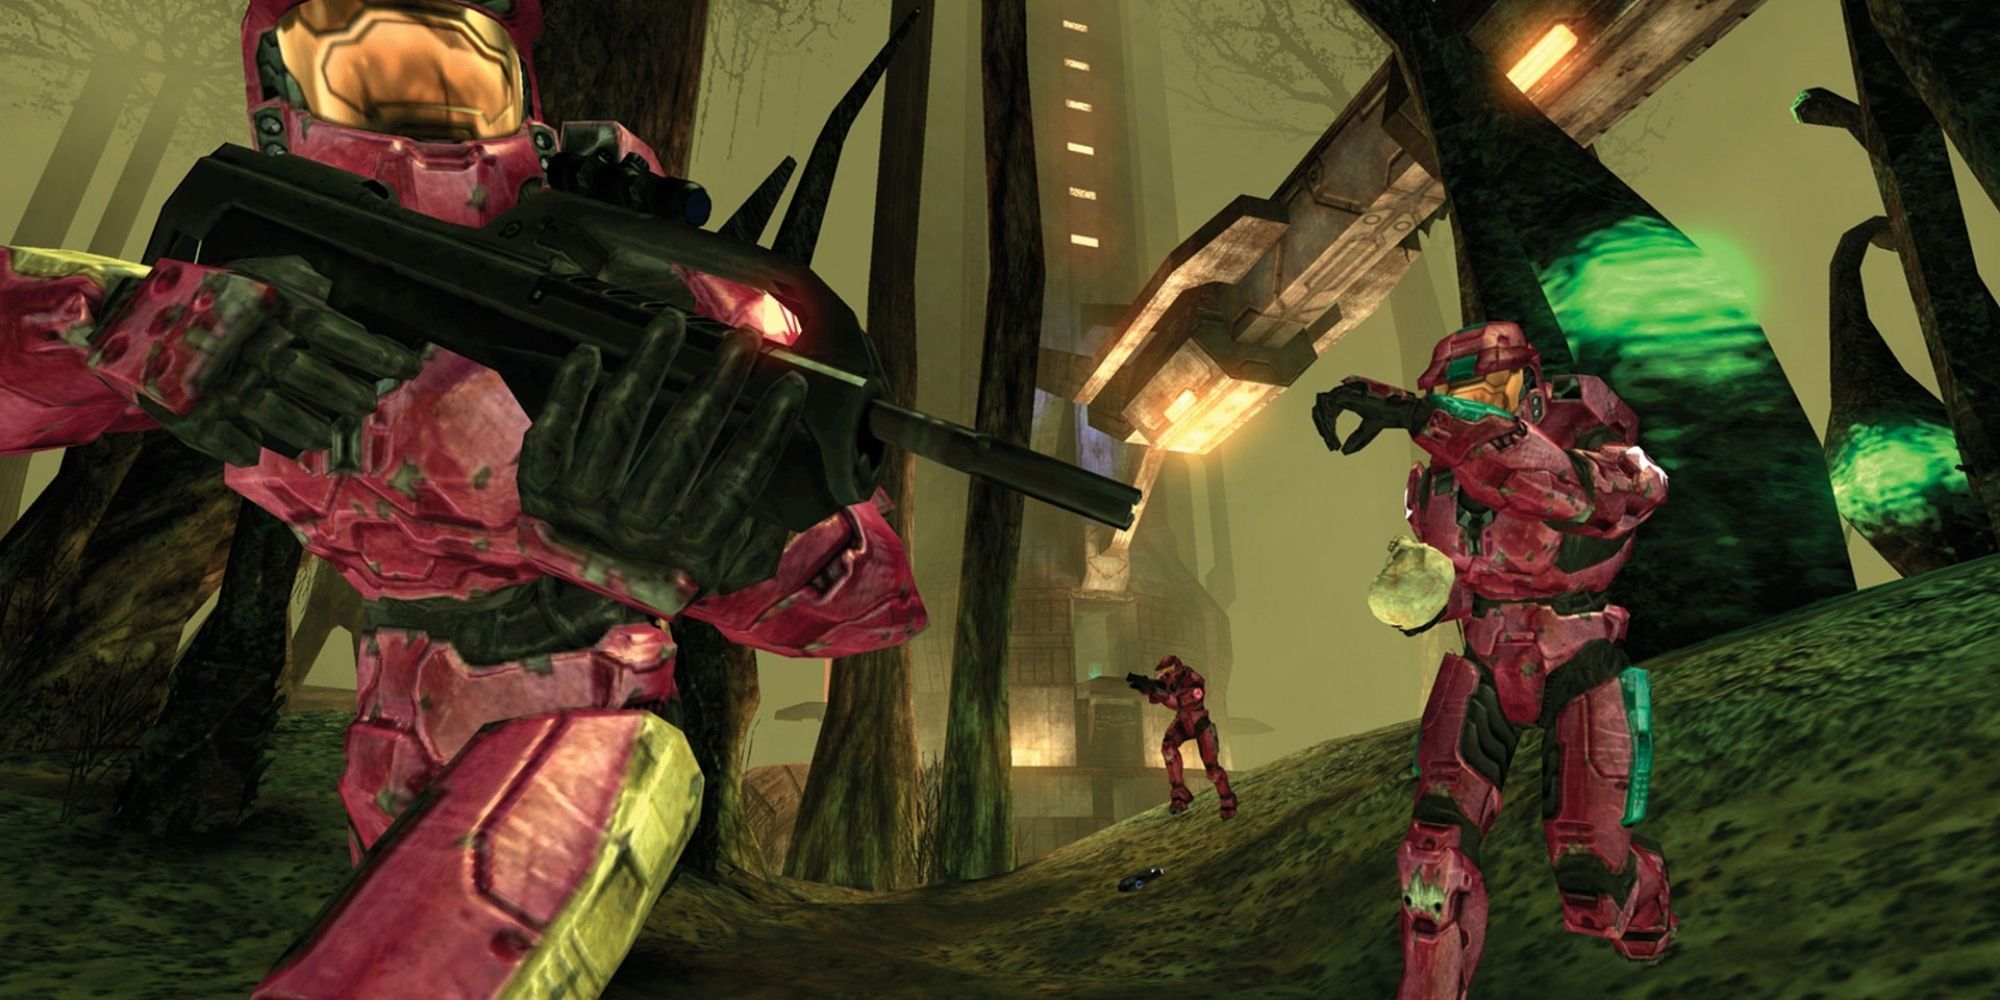 Halo 2 Multiplayer, 3 Players In Red Armour Running Through A Map